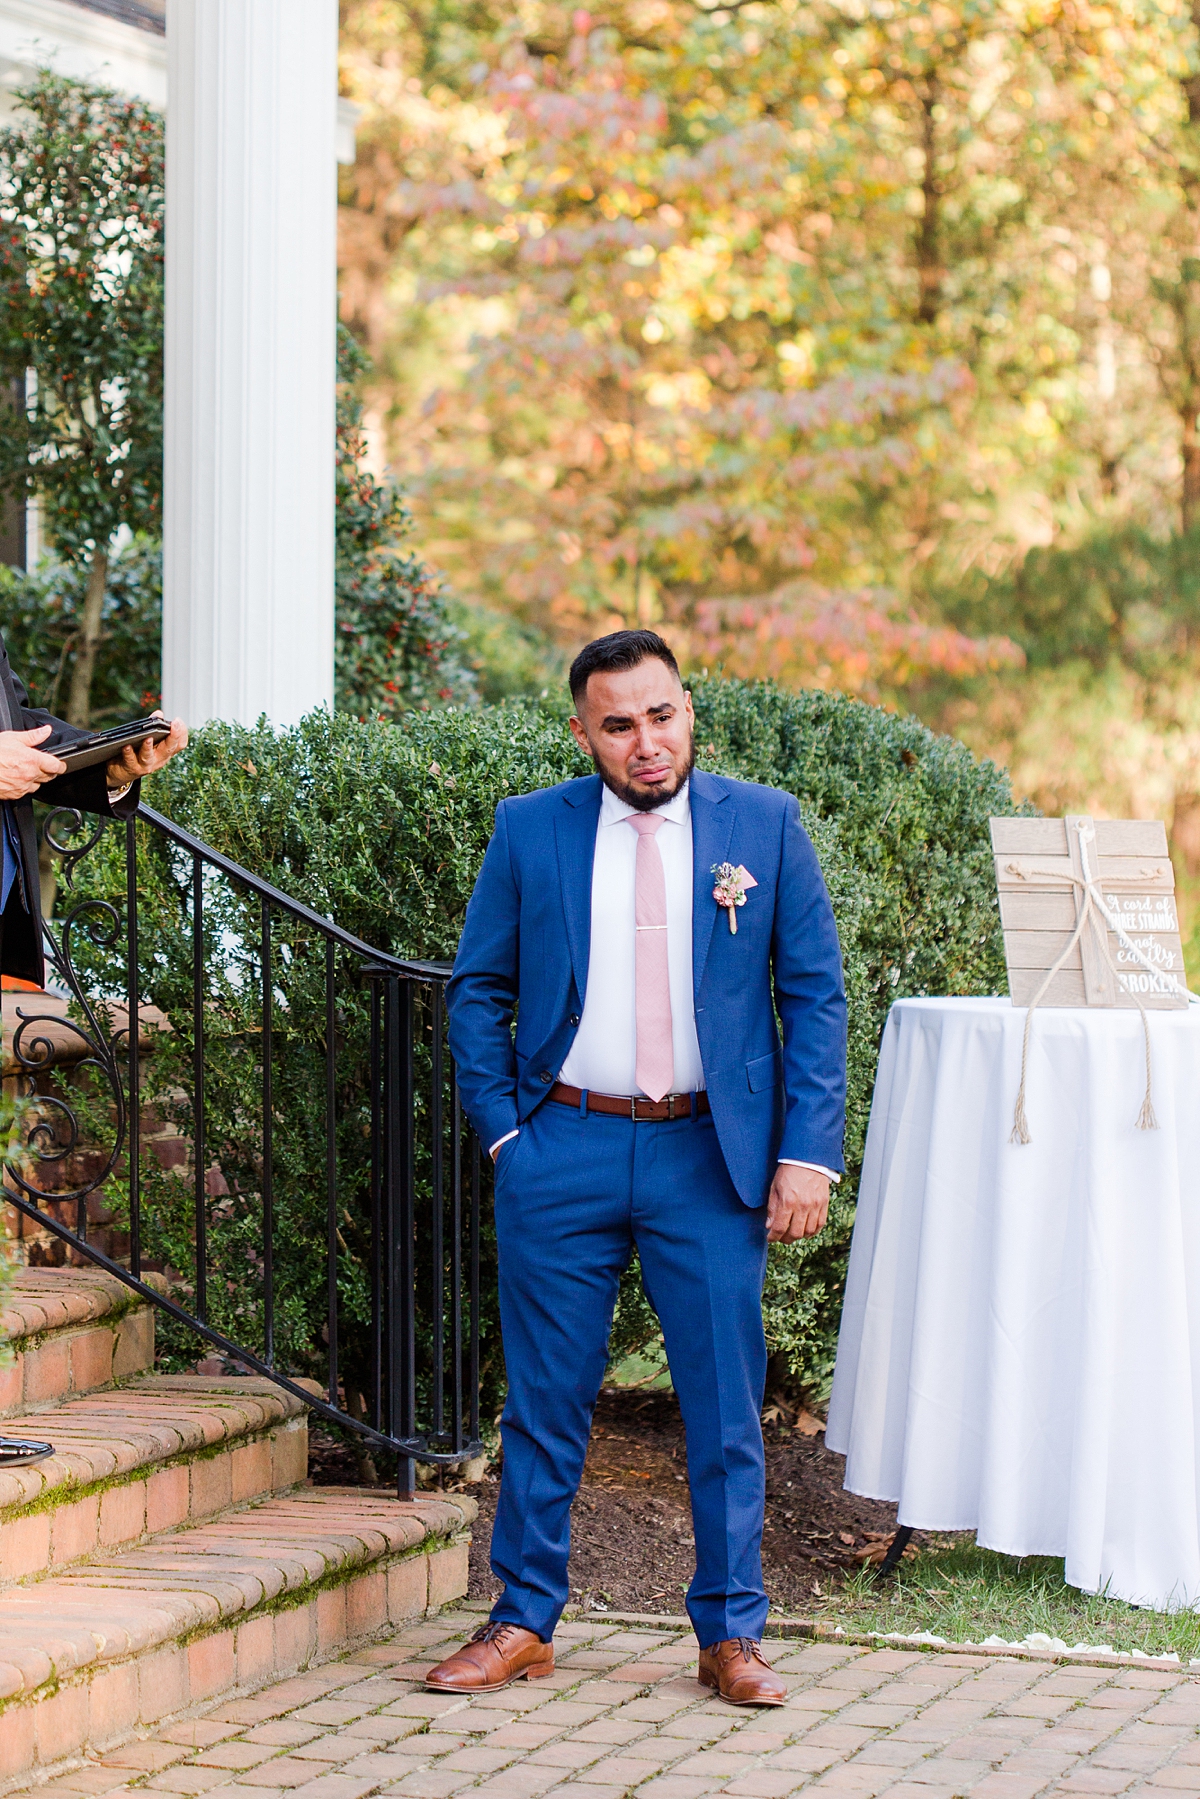 Groom's Reaction to Bride Walking Down the Aisle During Ceremony at Virginia Cliffe Inn Wedding. Wedding Photography by Richmond Wedding Photographer Kailey Brianne Photography.